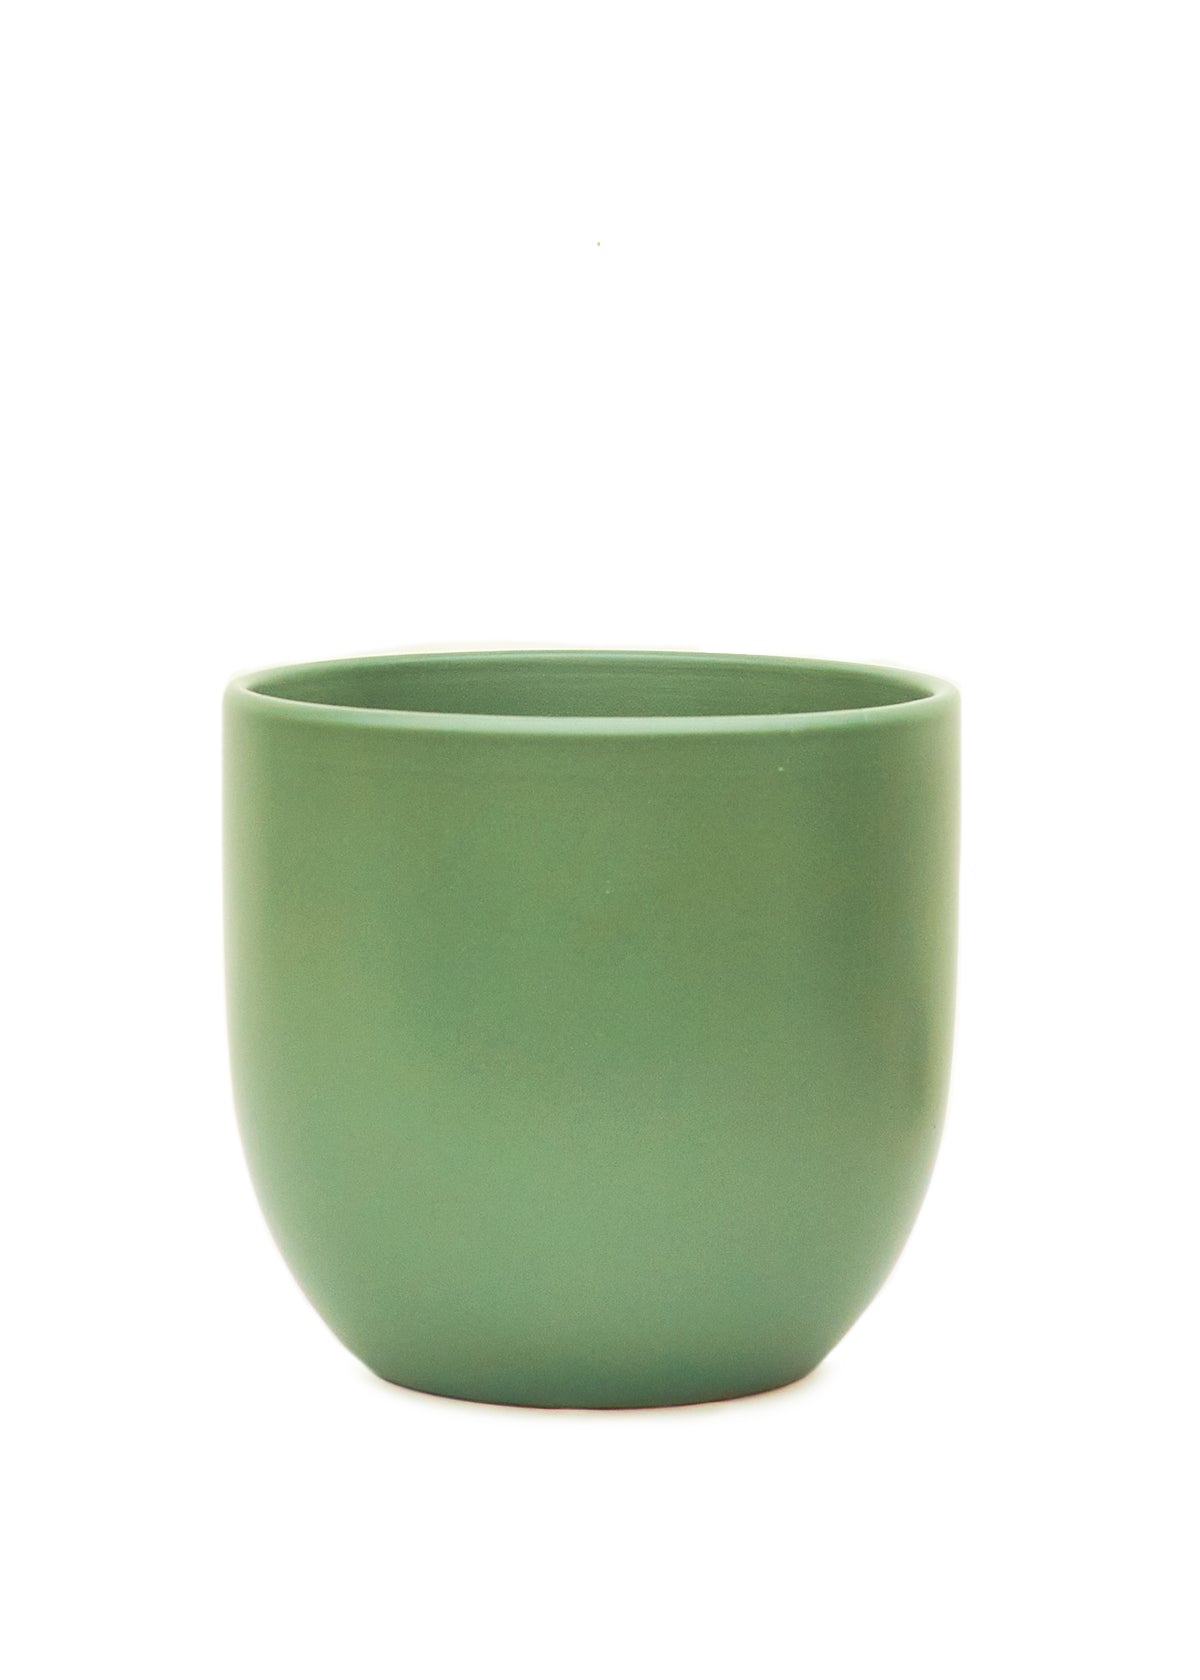 Rounded Ceramic Planter, Green 5" Wide